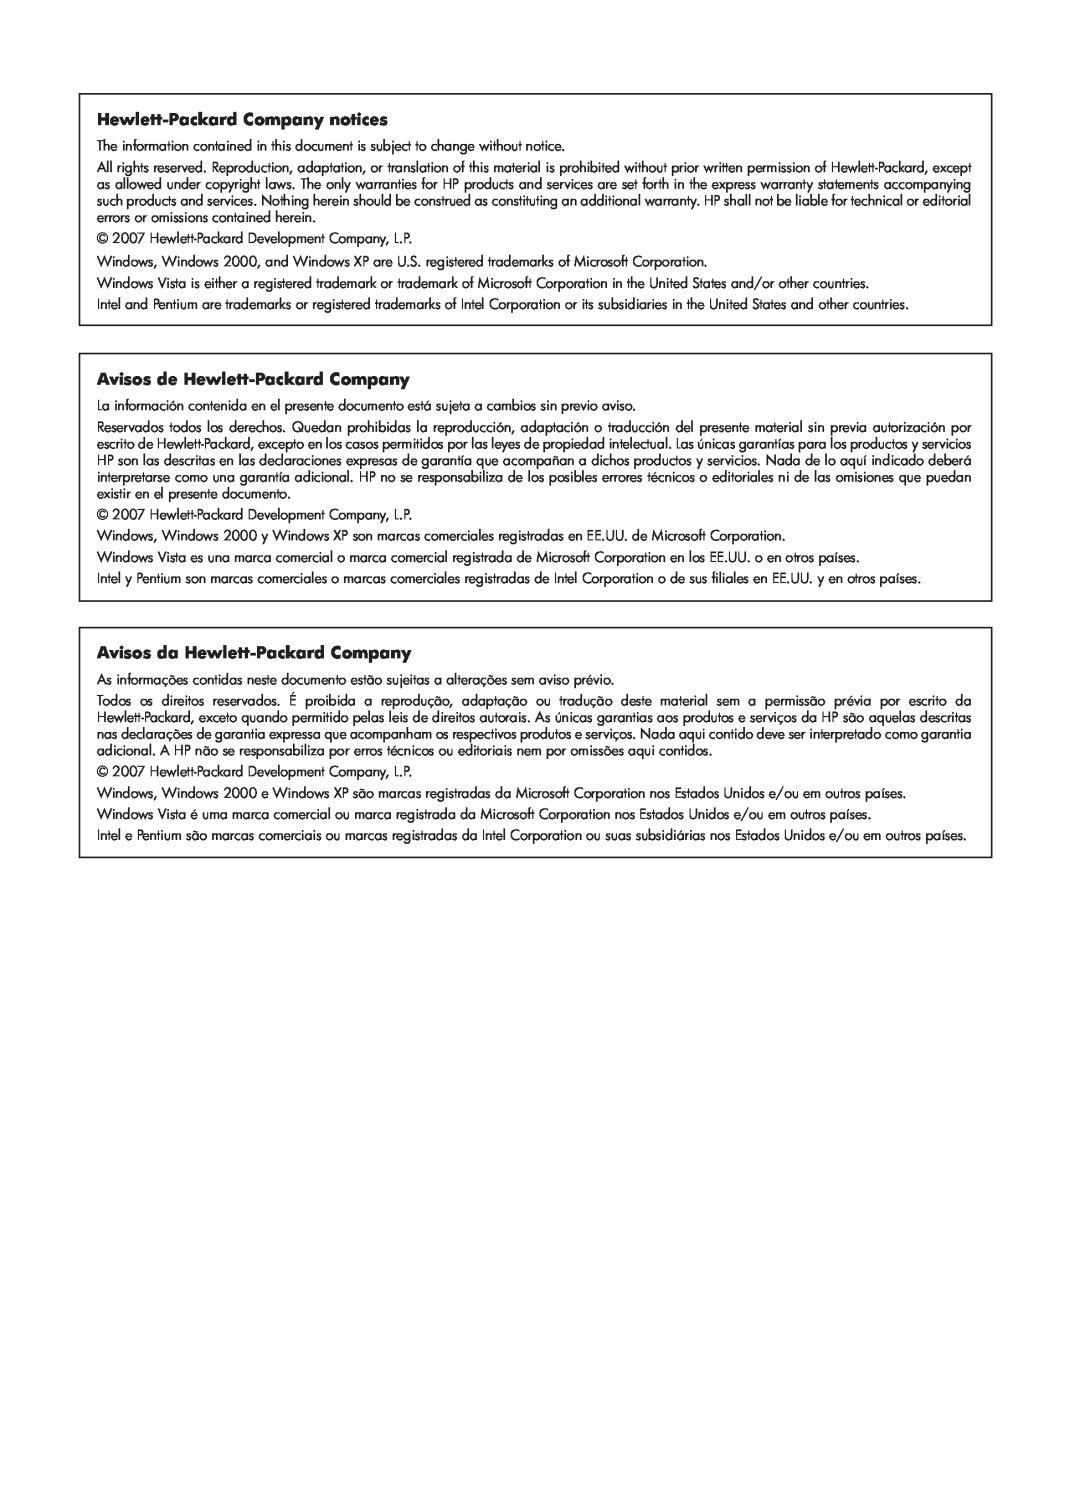 HP D7560 manual Hewlett-Packard Company notices, Avisos de Hewlett-Packard Company, Avisos da Hewlett-Packard Company 